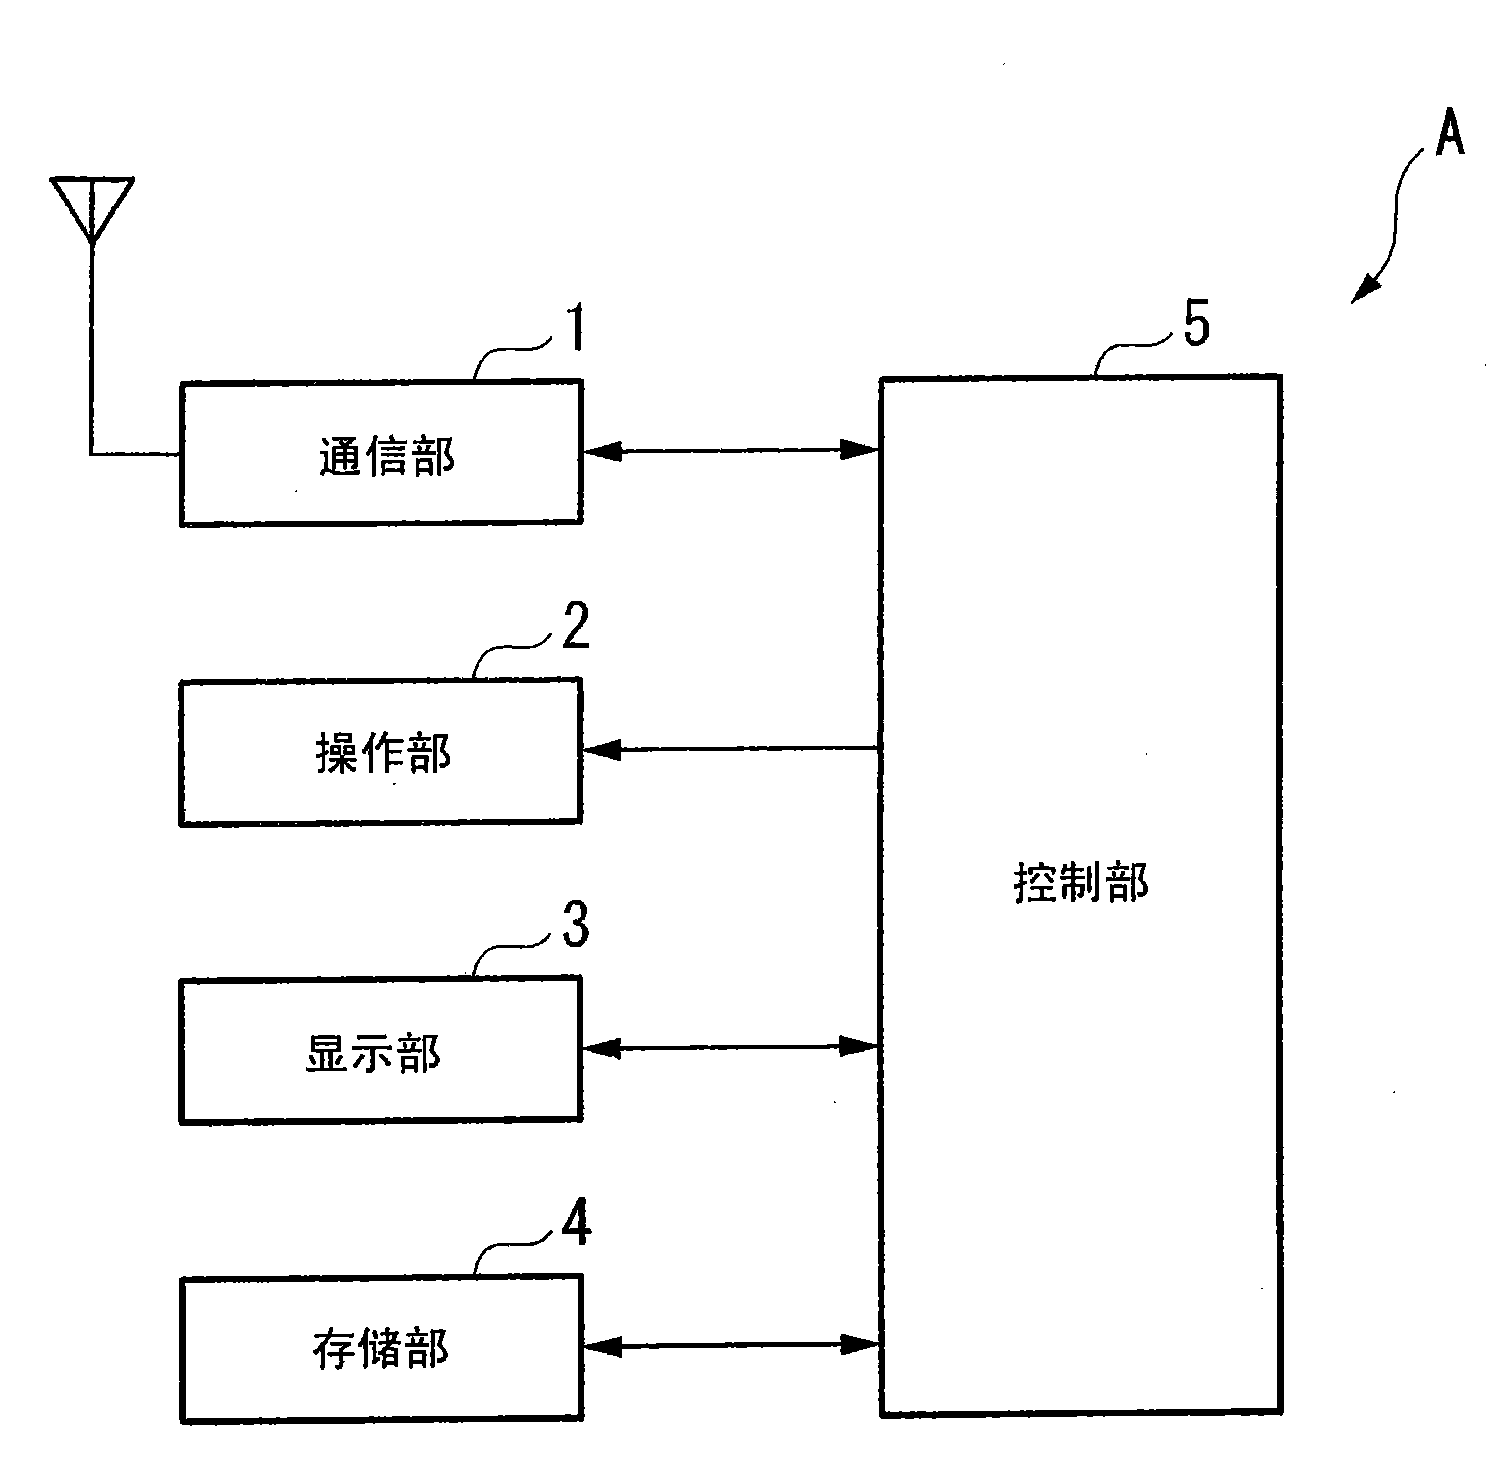 Mobile terminal, base station, and mobile terminal positioning method